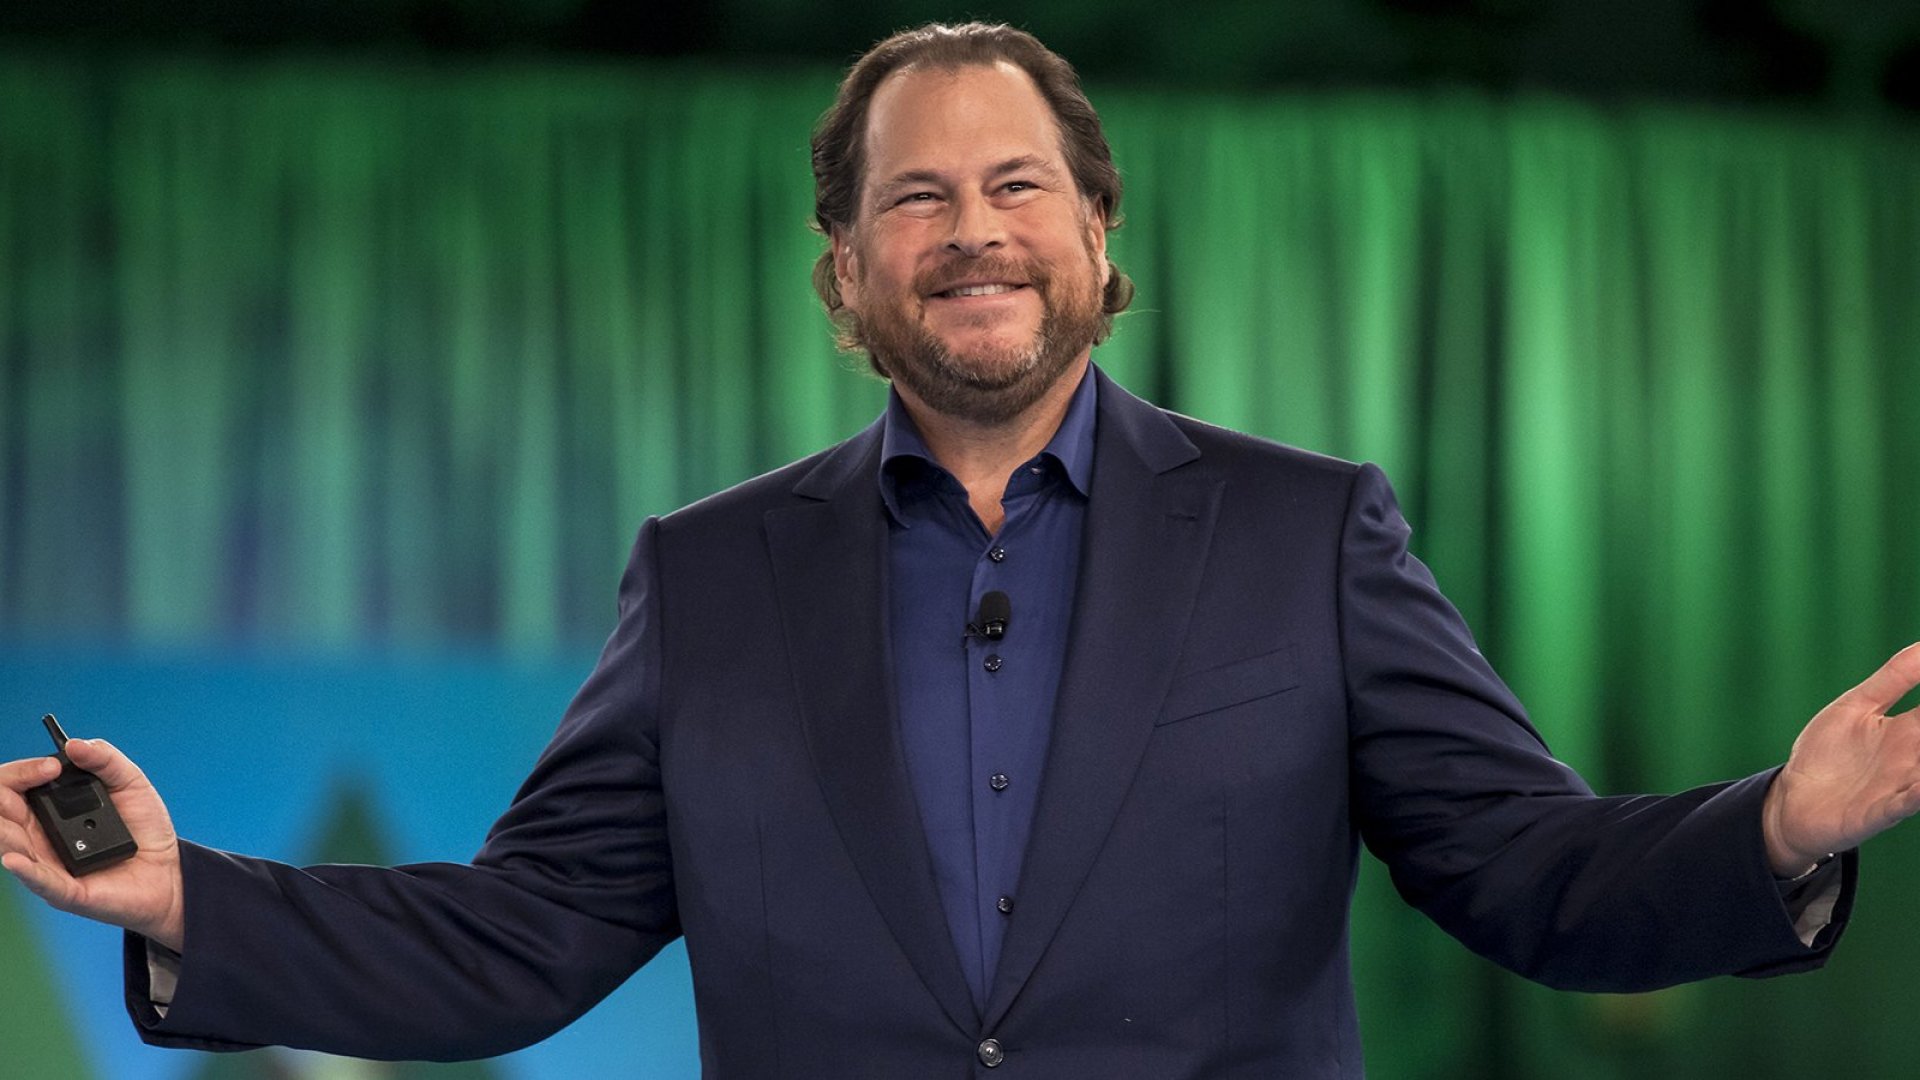 Smiling Marc Benioff wearing a blue suit while raising his arms